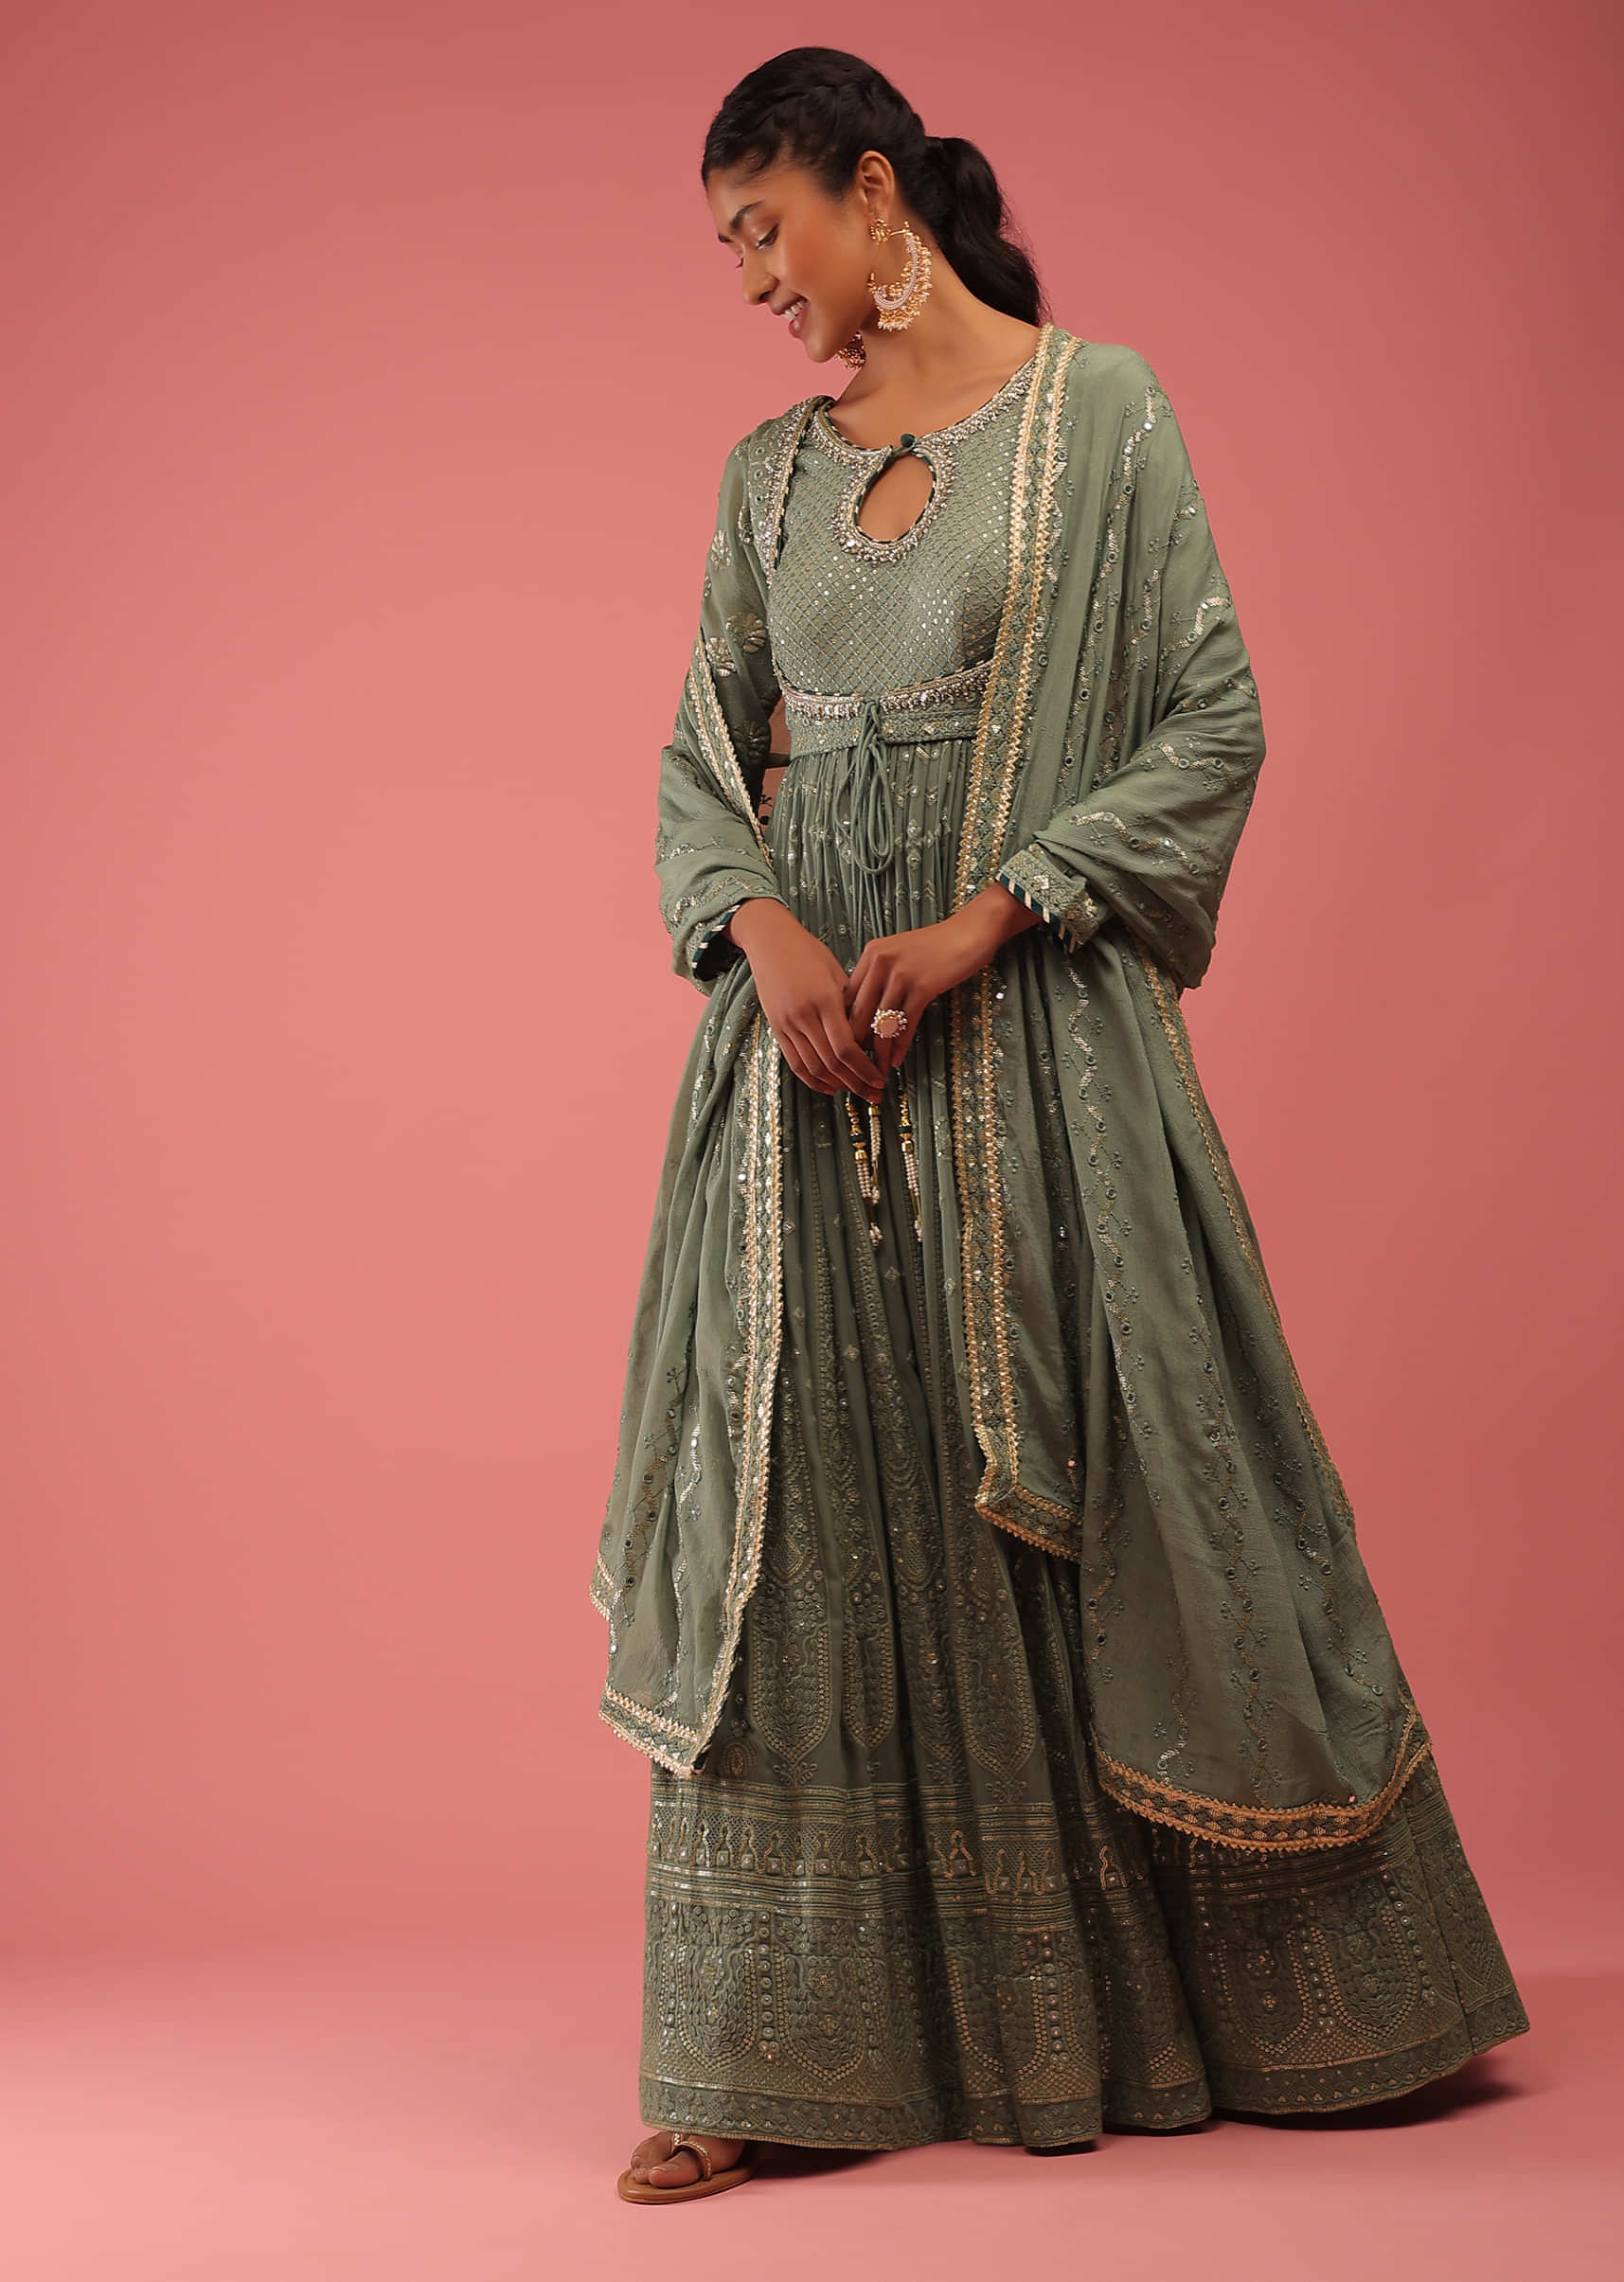 Oil Green Anarkali Suit In Lucknowi Embroidery In Kalidar Motifs, Crafted In Georgette With An Attachable Jacket In 3/4Th Sleeves